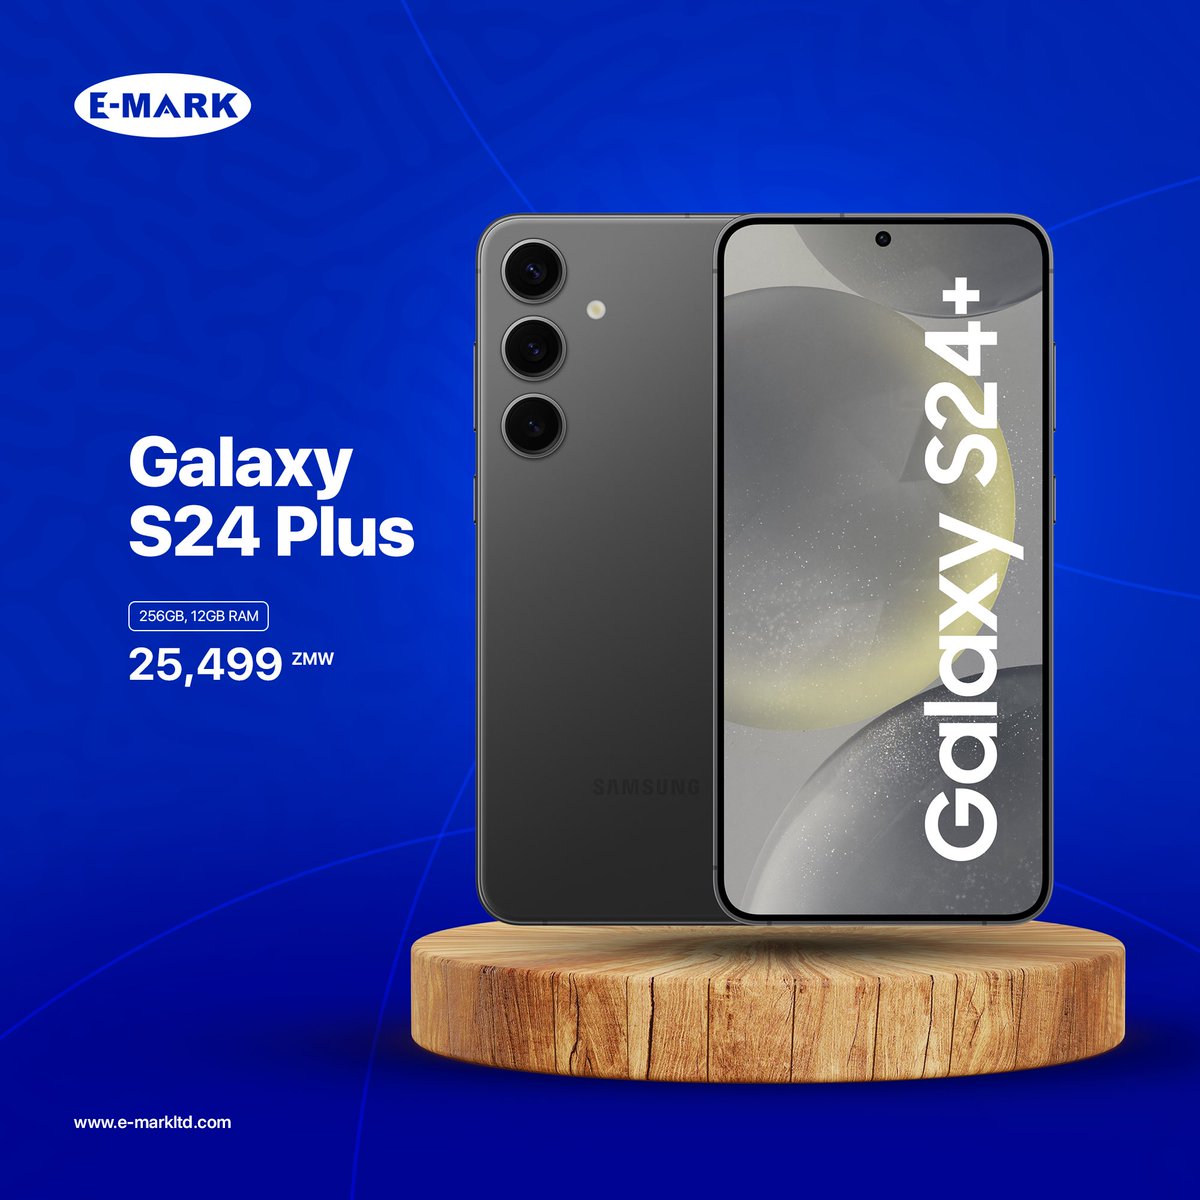 The Galaxy S24 Plus feels like a flagship phone despite its shy appearance. Big, bright, outdoor-friendly quality HD display, same Galaxy AI features as the s24 Ultra and class leading long battery life. #Samsung #Galaxys24Plus #ConnectingPeople